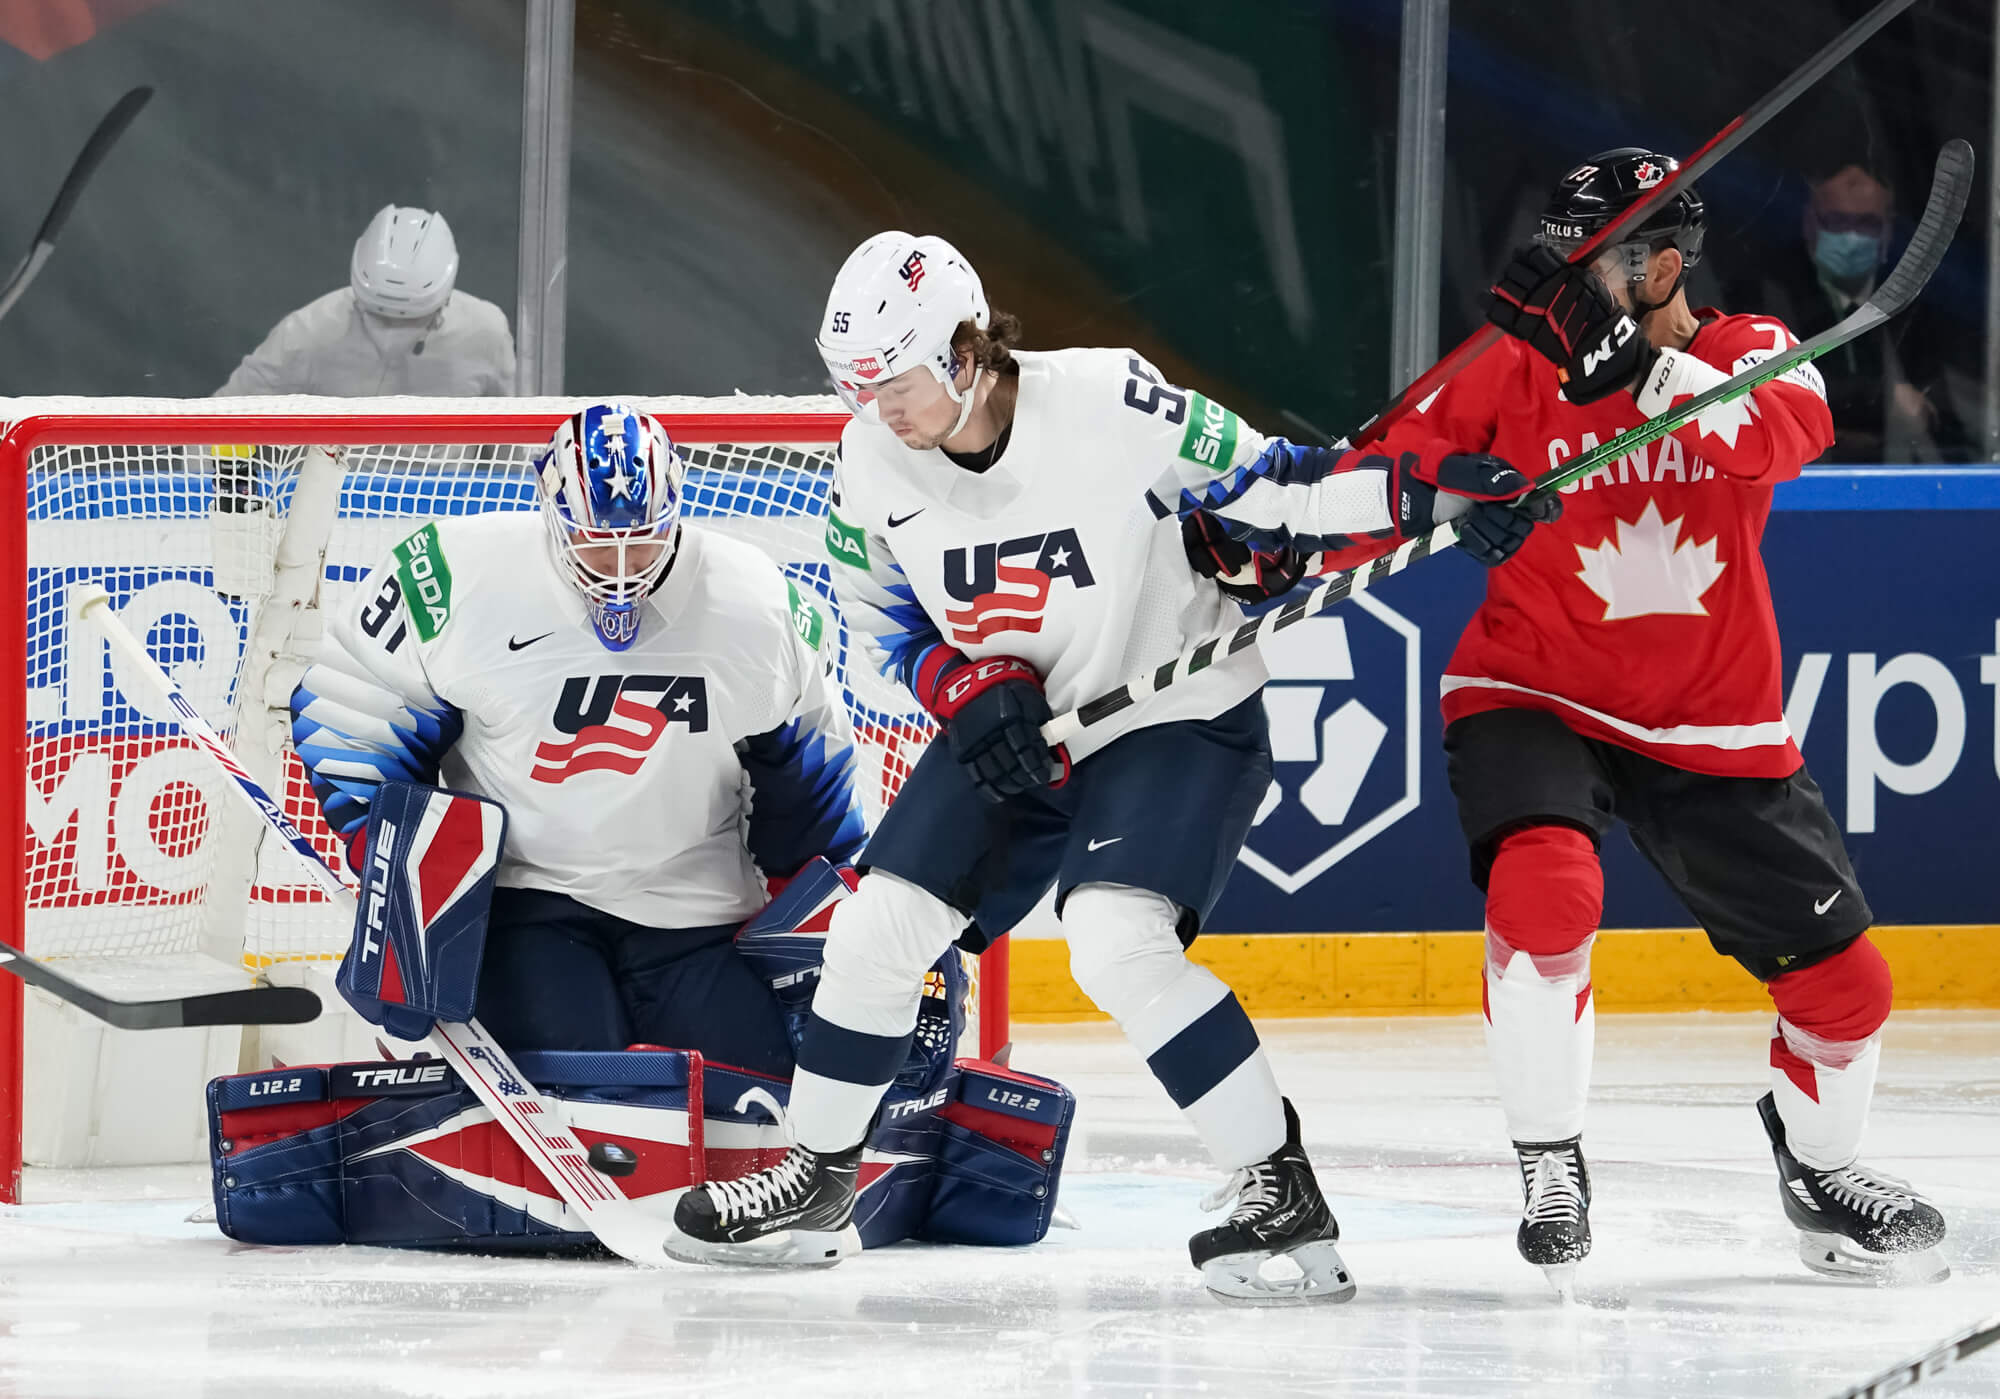 IIHF Worlds Semifinals USA vs Canada Game Odds, Preview, and